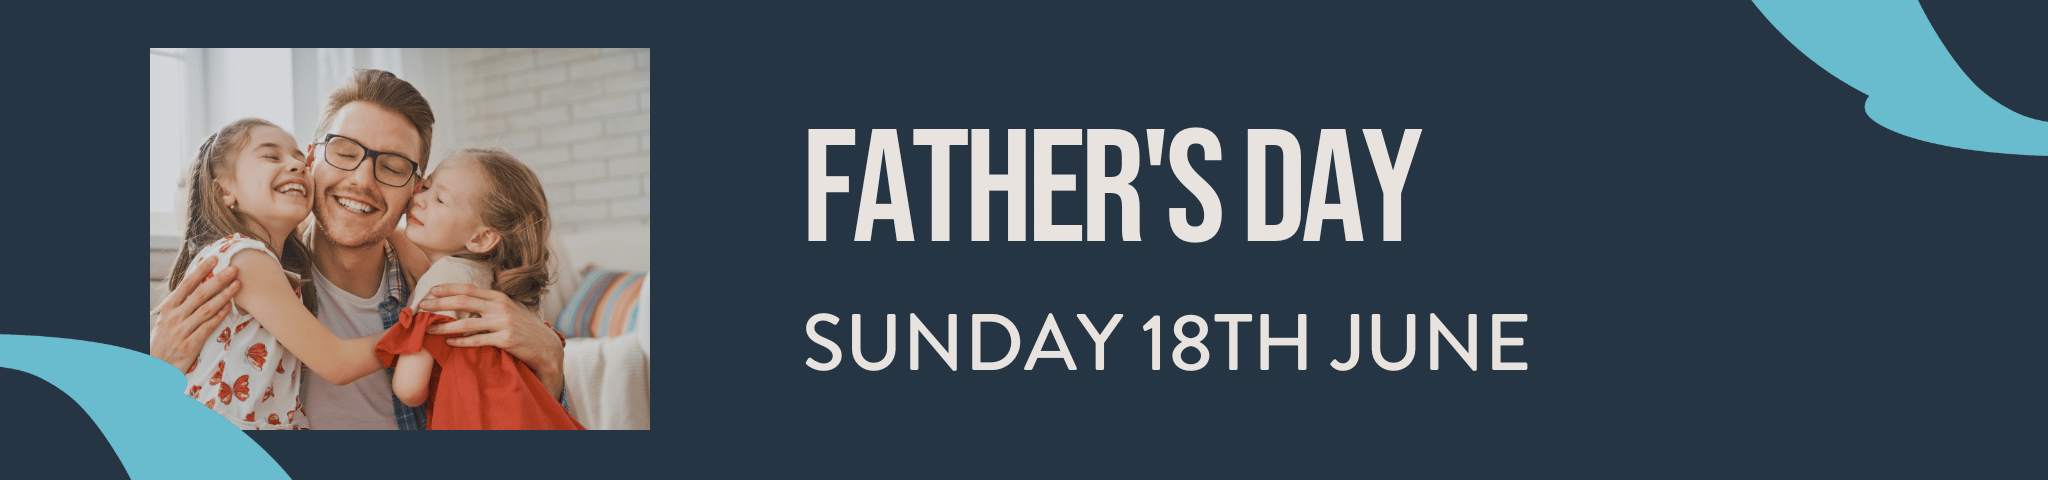 FATHER’S DAY AT OLBY’S SOUL CAFE